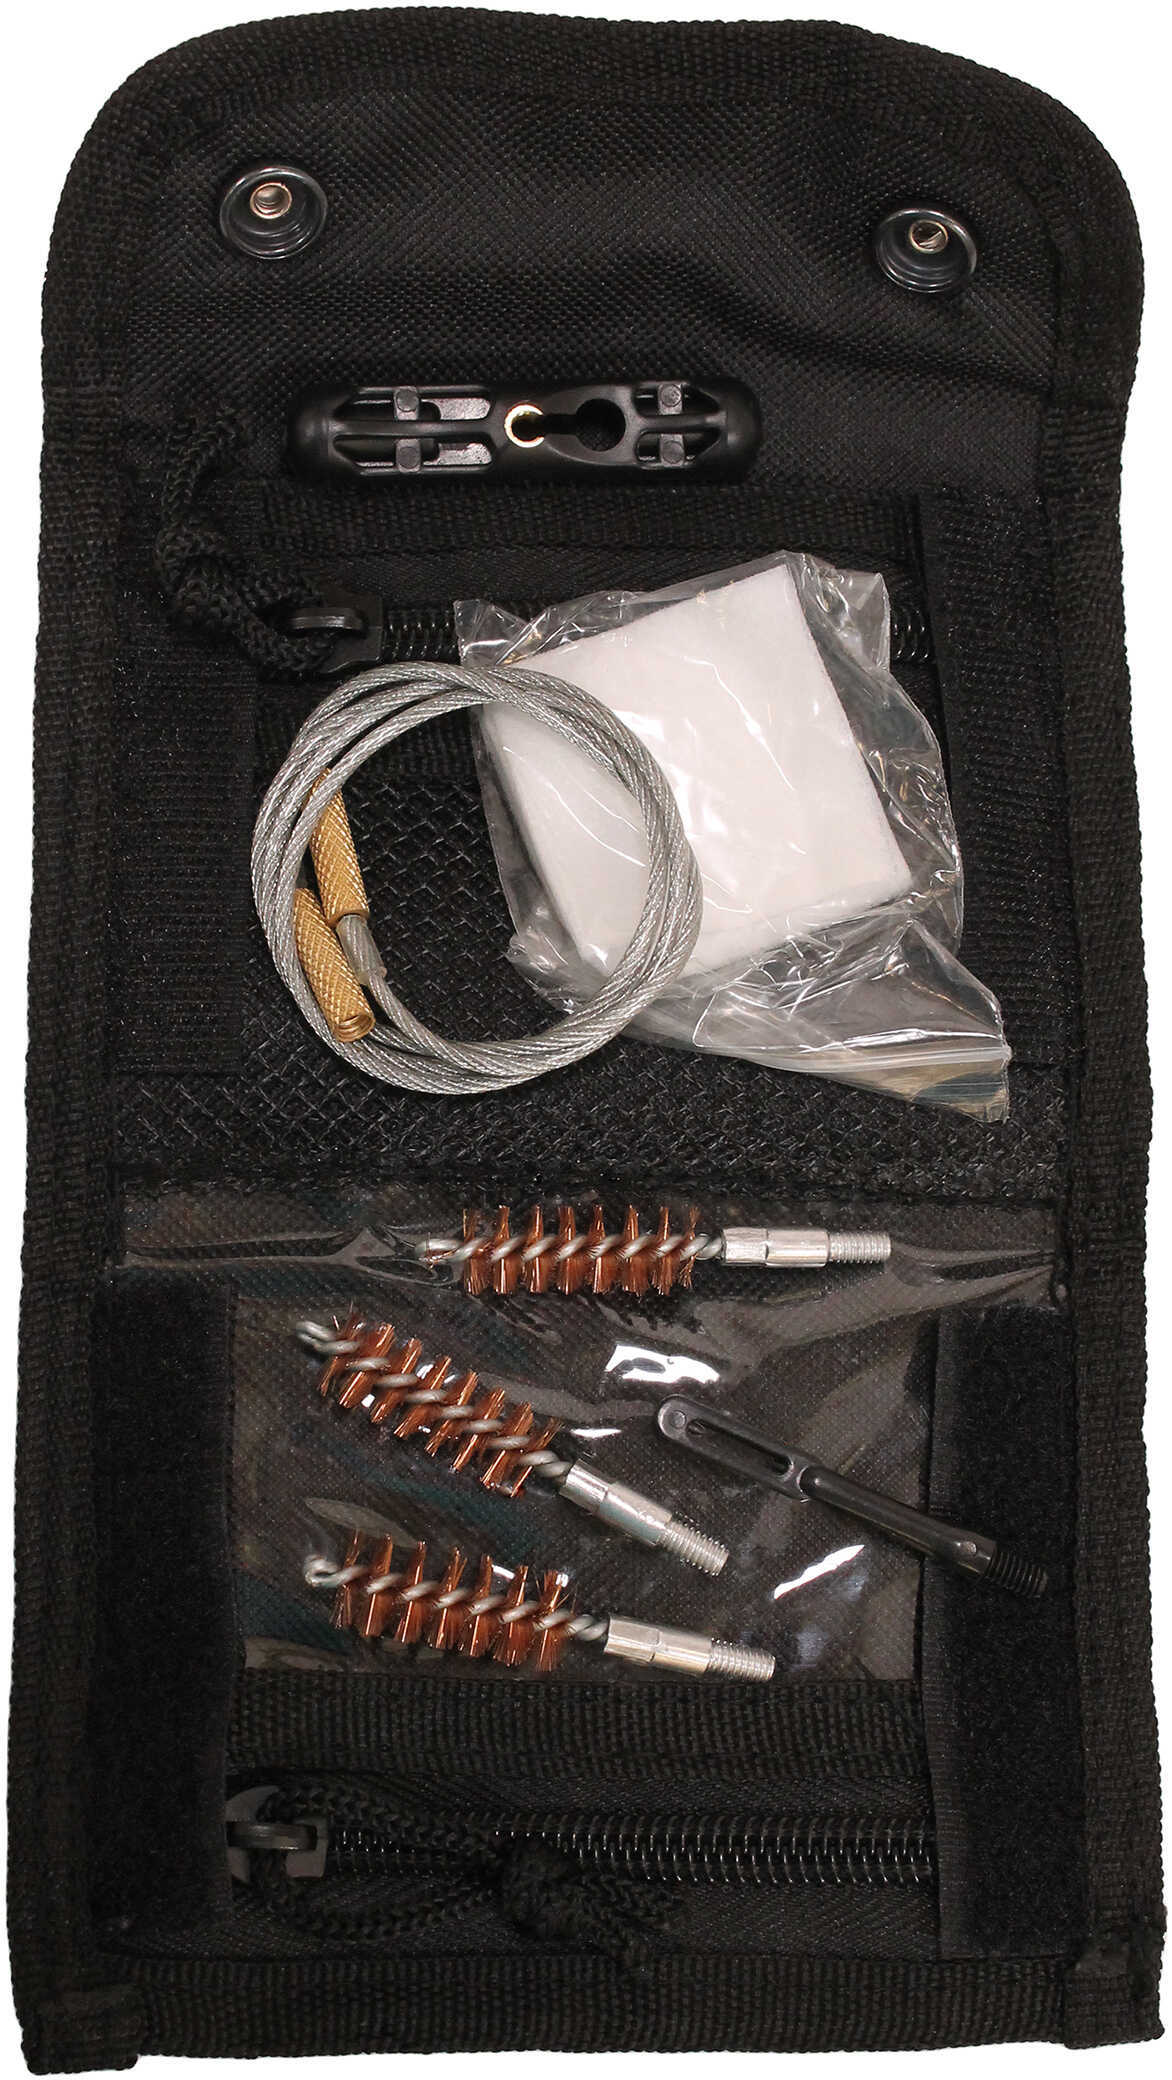 Remington Field Cable Cleaning Kit Pistol Md: 17459